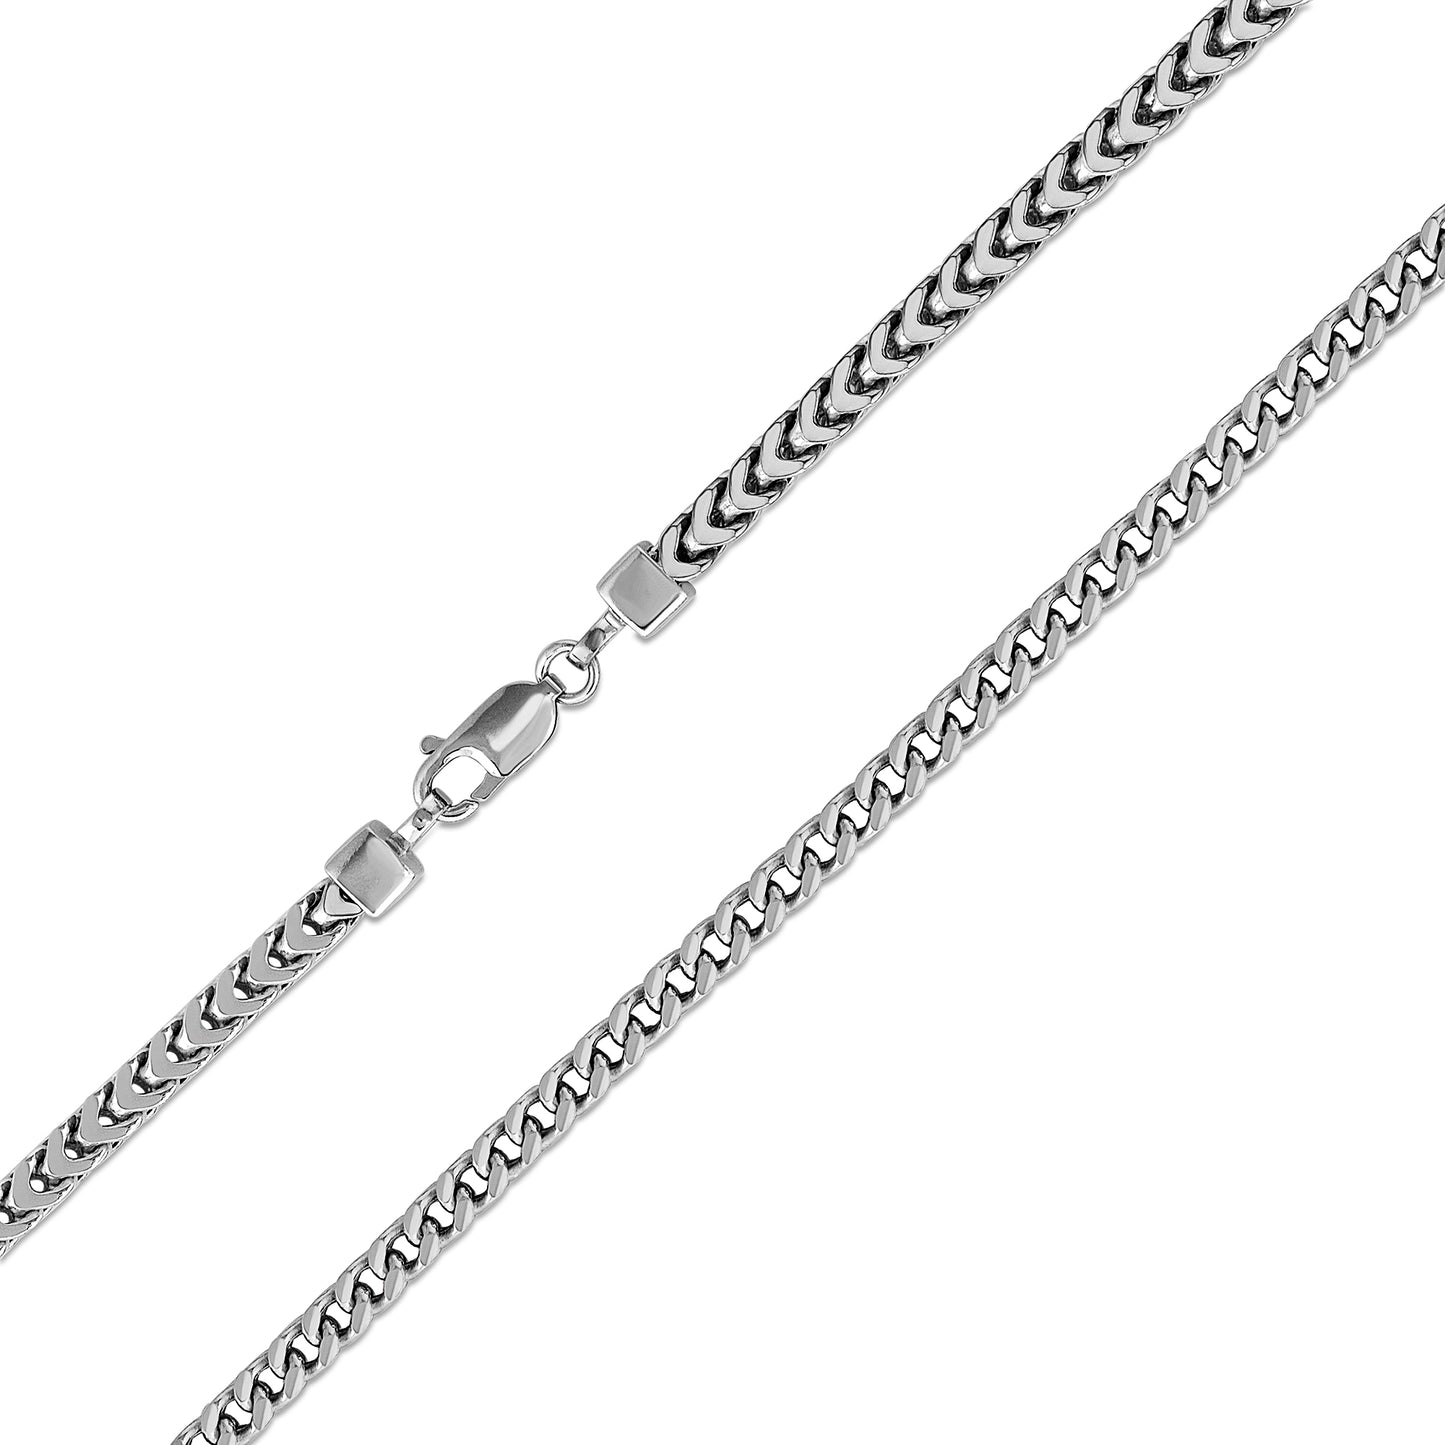 Silver 925 Rhodium Plated Franco Hollow Chain 5.5 mm. FRANCOH150R